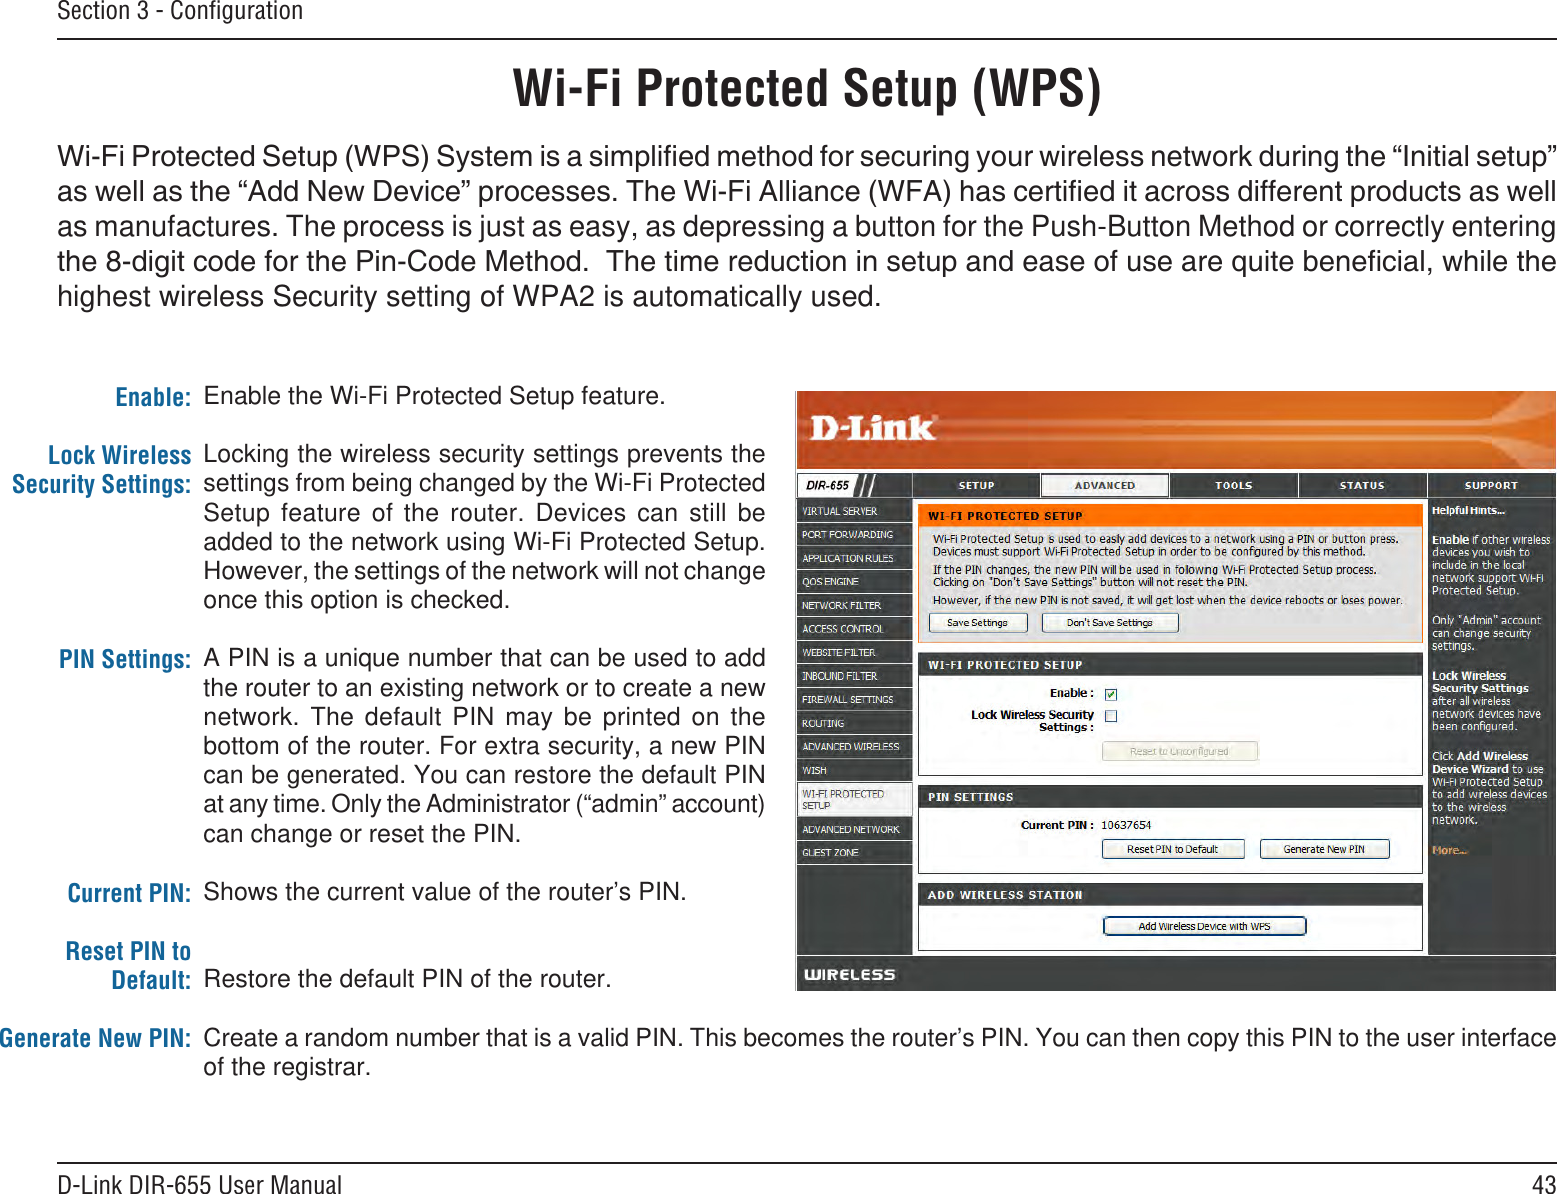 43D-Link DIR-655 User ManualSection 3 - ConﬁgurationWi-Fi Protected Setup (WPS)Enable the Wi-Fi Protected Setup feature. Locking the wireless security settings prevents the settings from being changed by the Wi-Fi Protected Setup  feature  of  the  router.  Devices  can  still  be added to the network using Wi-Fi Protected Setup. However, the settings of the network will not change once this option is checked.A PIN is a unique number that can be used to add the router to an existing network or to create a new network.  The  default  PIN  may  be  printed  on  the bottom of the router. For extra security, a new PIN can be generated. You can restore the default PIN at any time. Only the Administrator (“admin” account) can change or reset the PIN. Shows the current value of the router’s PIN. Restore the default PIN of the router. Create a random number that is a valid PIN. This becomes the router’s PIN. You can then copy this PIN to the user interface of the registrar.Enable:Lock Wireless Security Settings:PIN Settings:Current PIN:Reset PIN to Default:Generate New PIN:as manufactures. The process is just as easy, as depressing a button for the Push-Button Method or correctly entering highest wireless Security setting of WPA2 is automatically used.